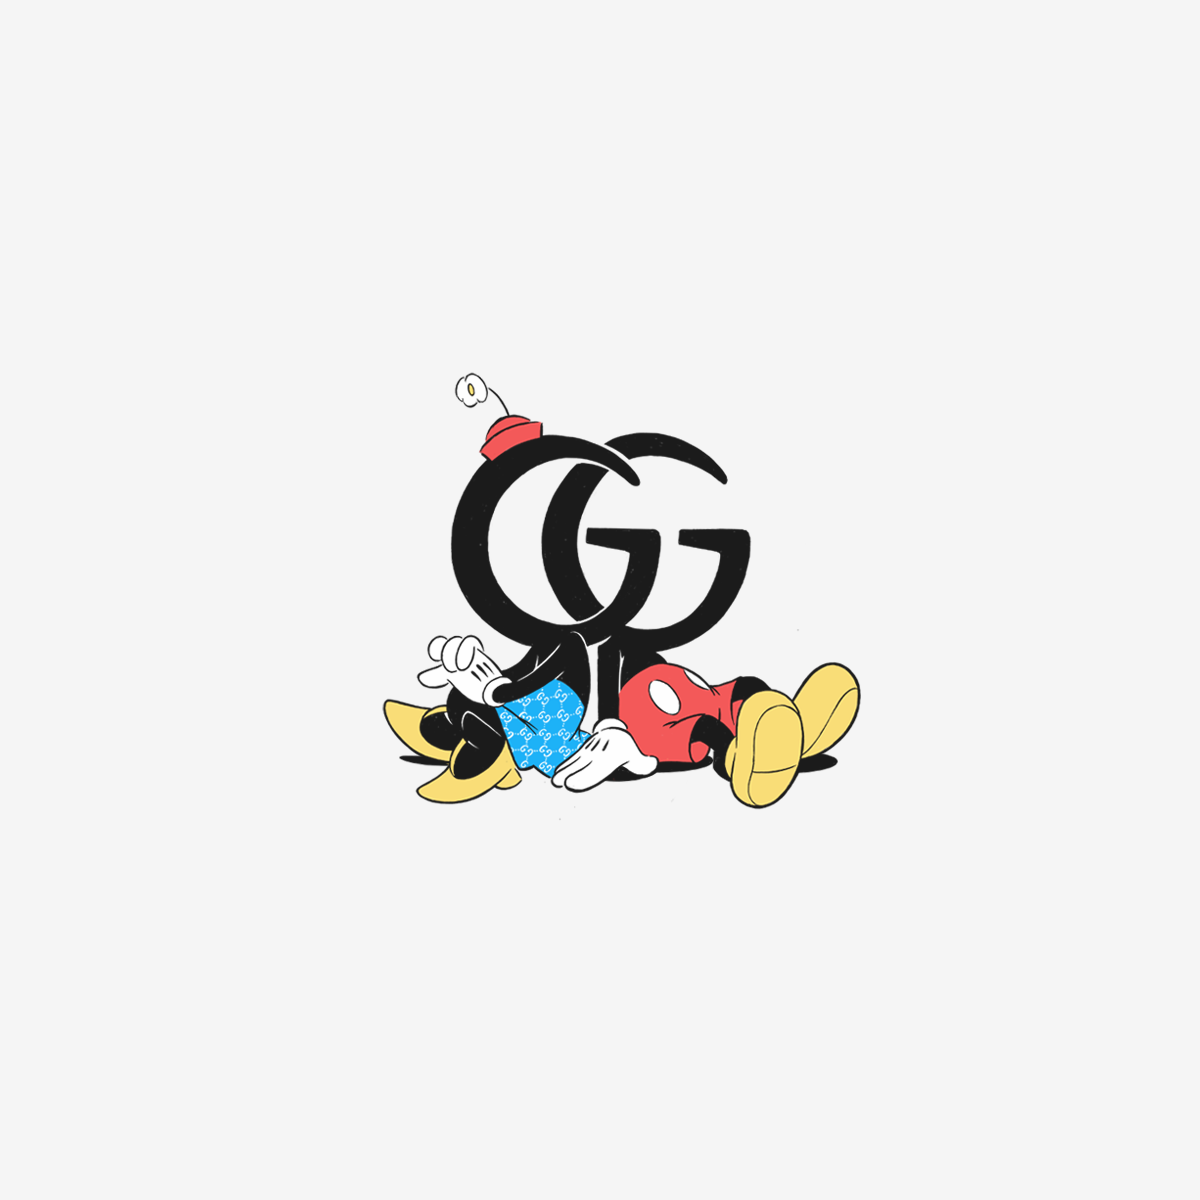 Gucci Mickey Mouse Wallpapers